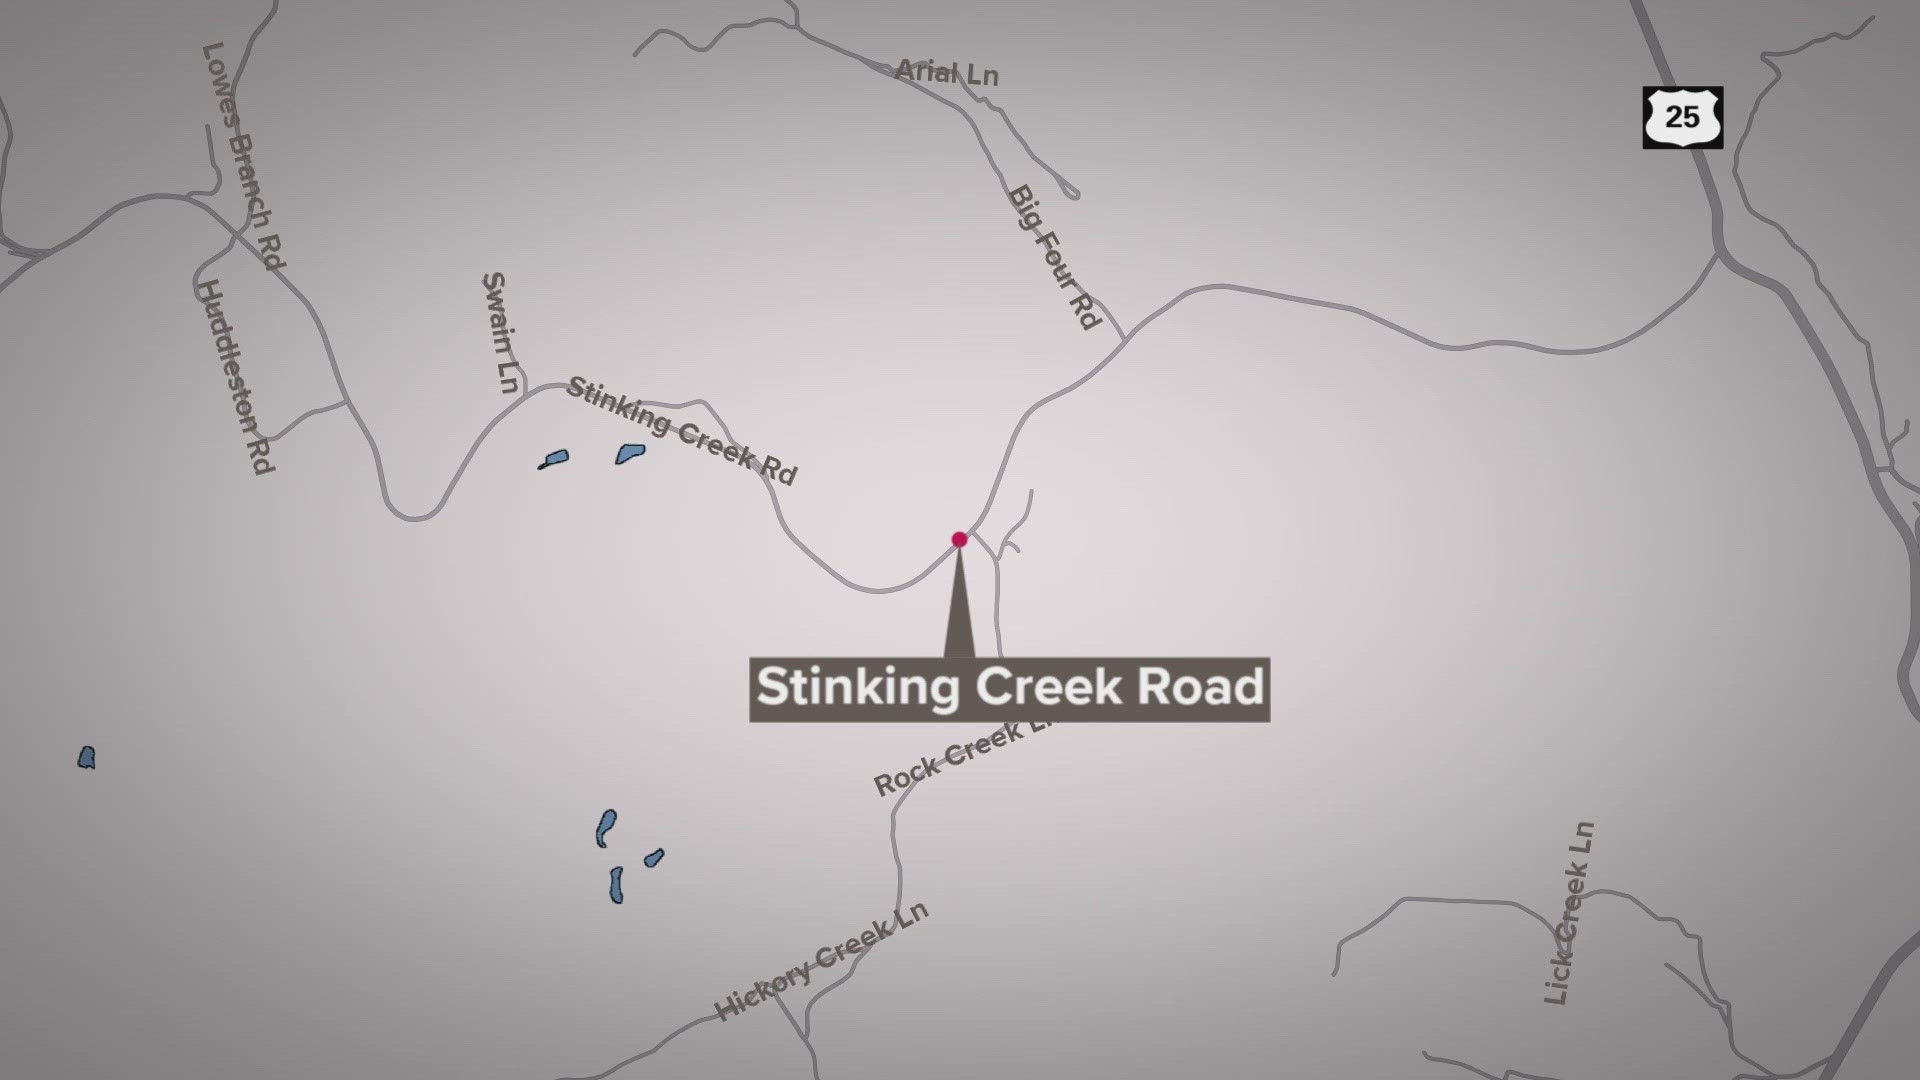 The Tennessee Bureau of Investigation said the fire happened Wednesday morning on Stinking Creek Road.